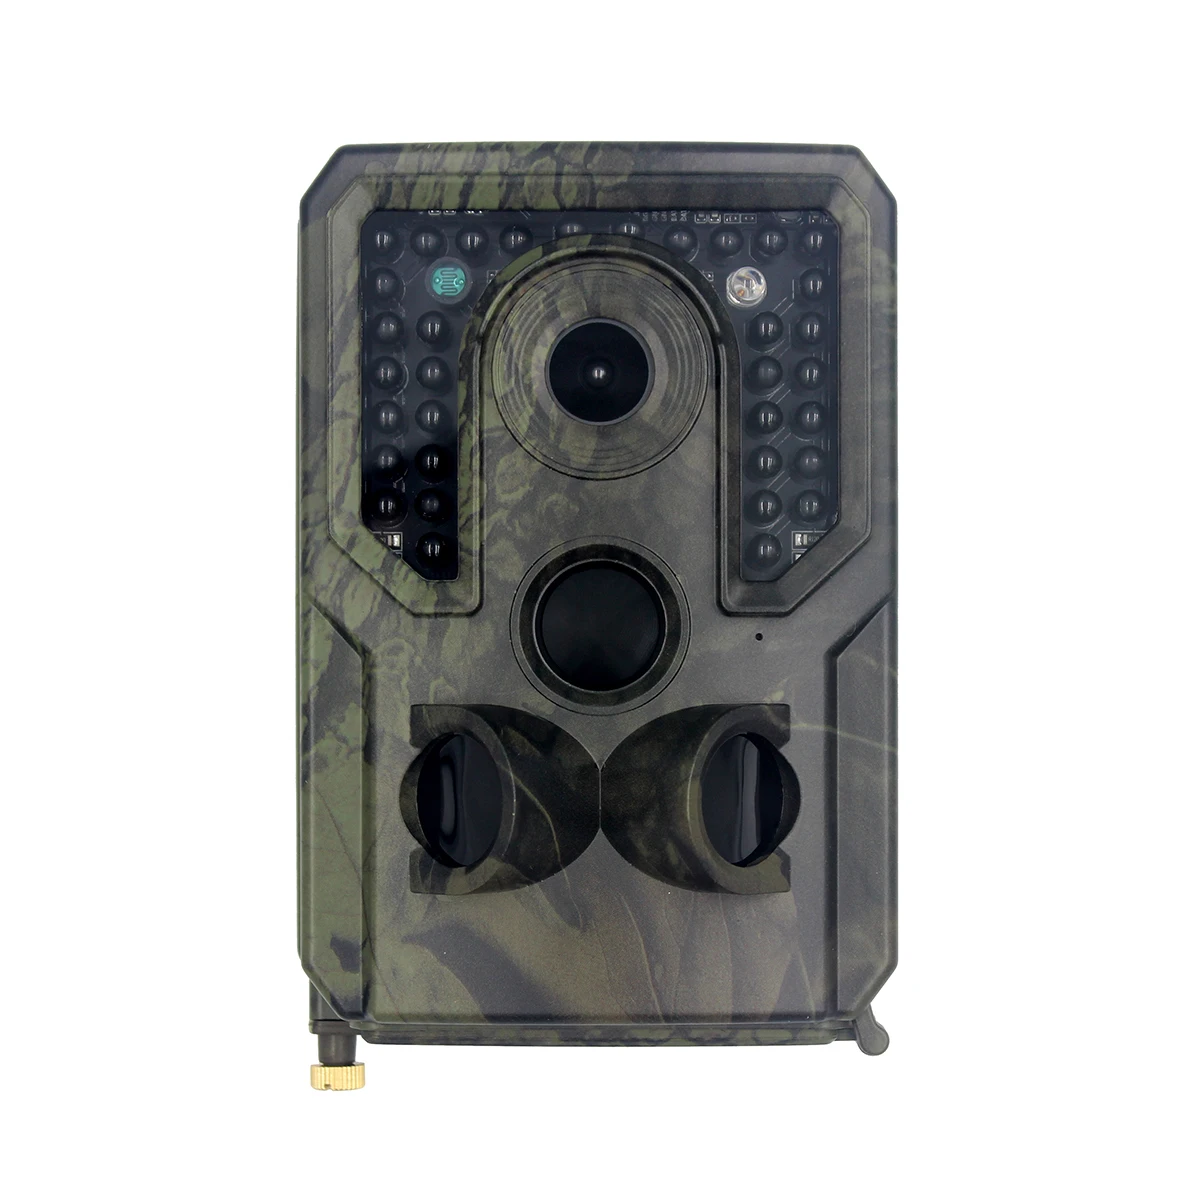 

Hot Selling Wildlife Trailing PR400 Wild Video Game IR Camera Home Security Motion Detection 1080p Hunting Trail Camera